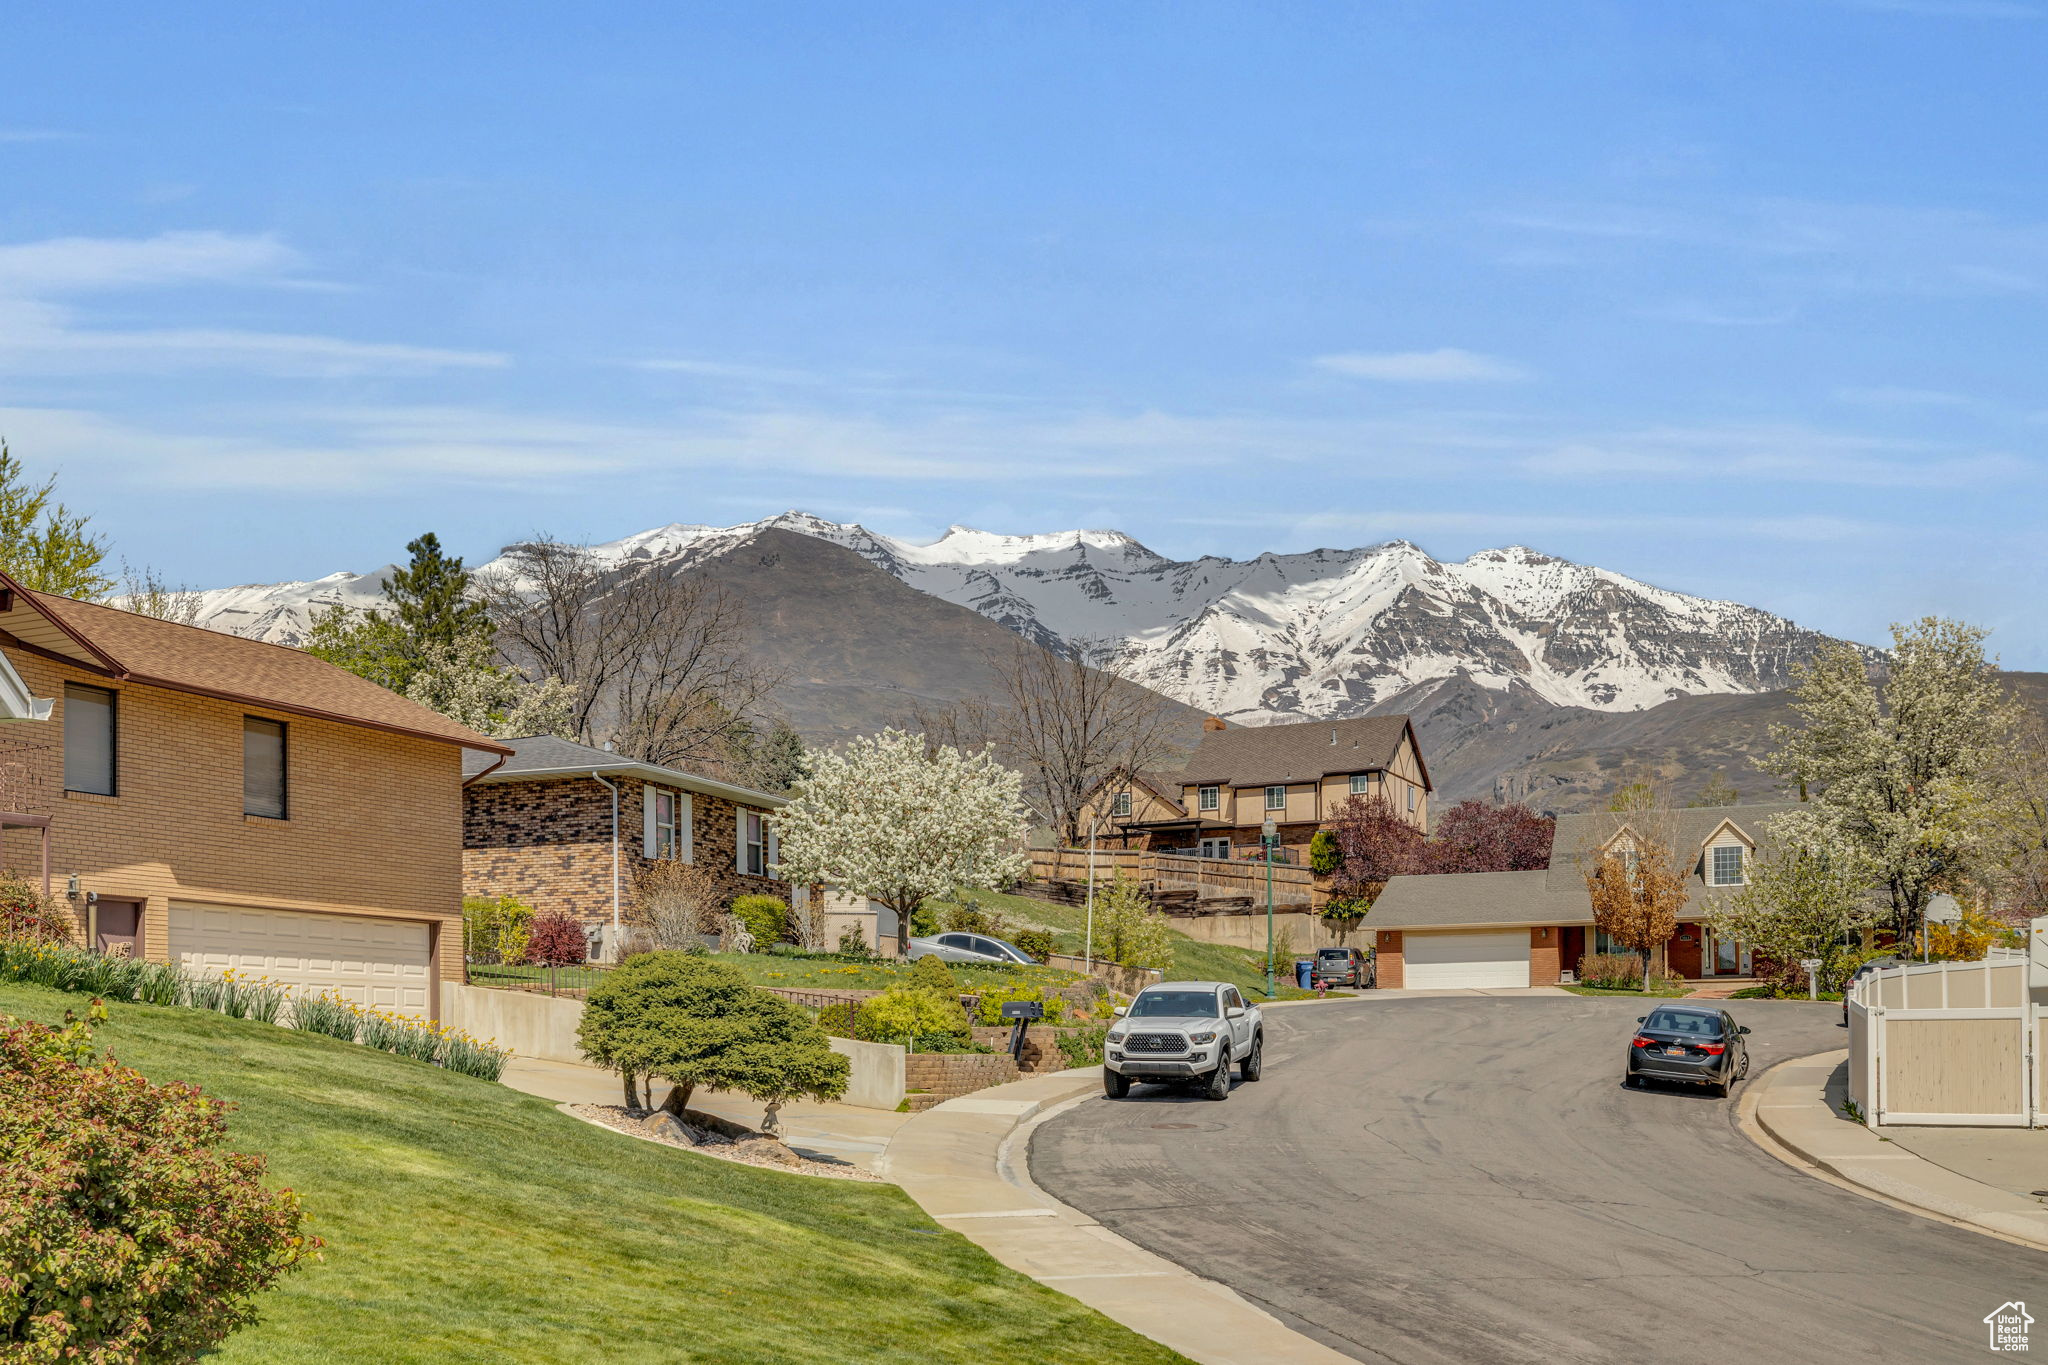 View of Mt. Timpanogos from the front porch